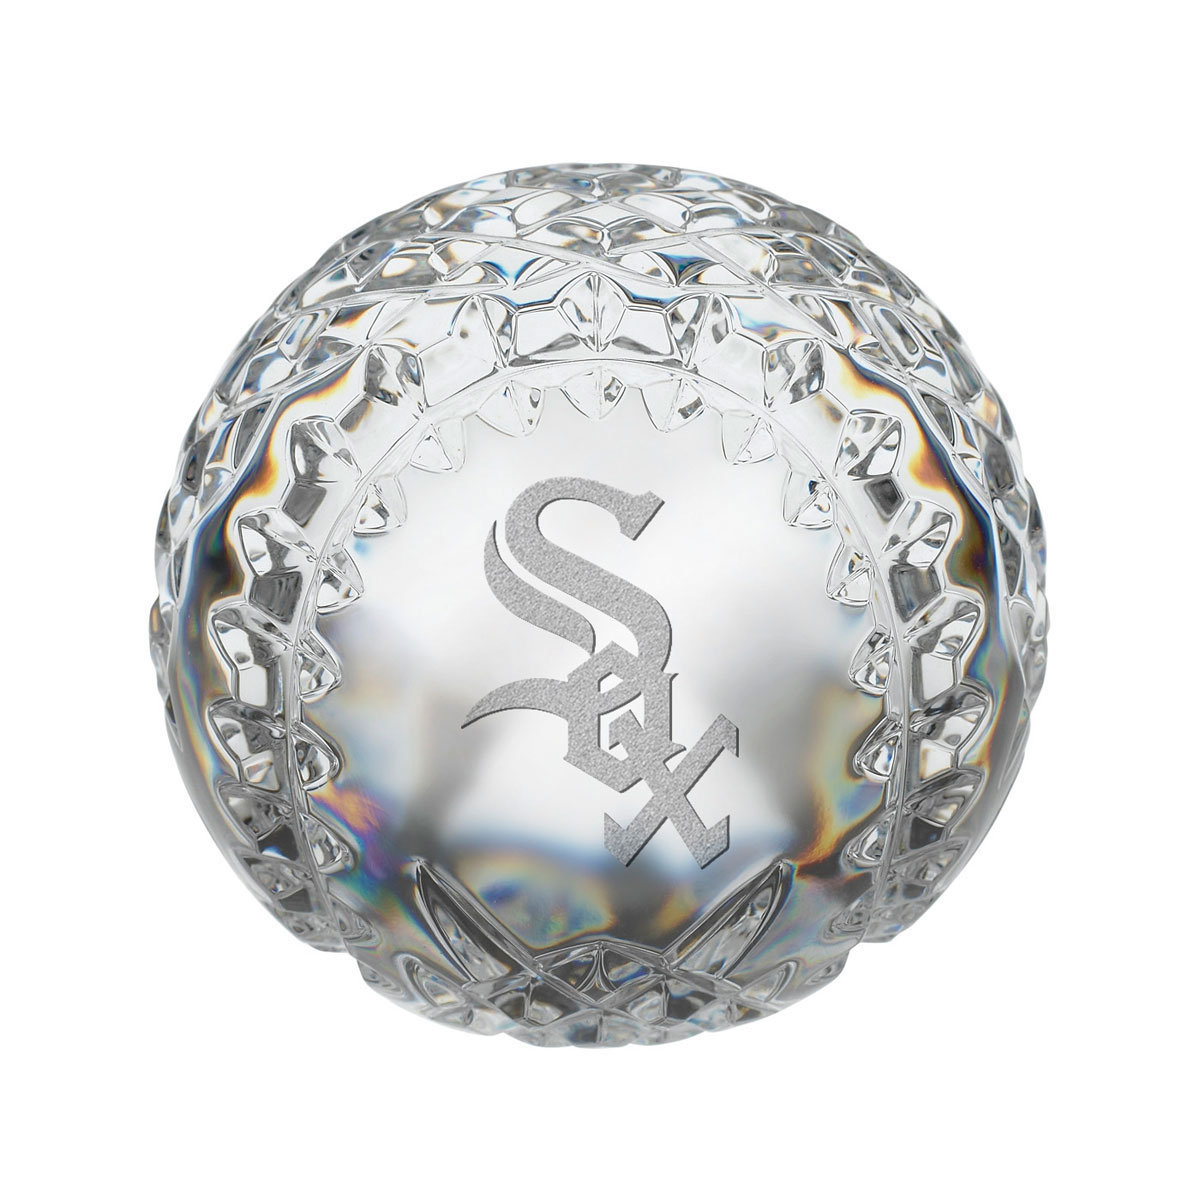 Waterford MLB Chicago White Sox Crystal Baseball Paperweight